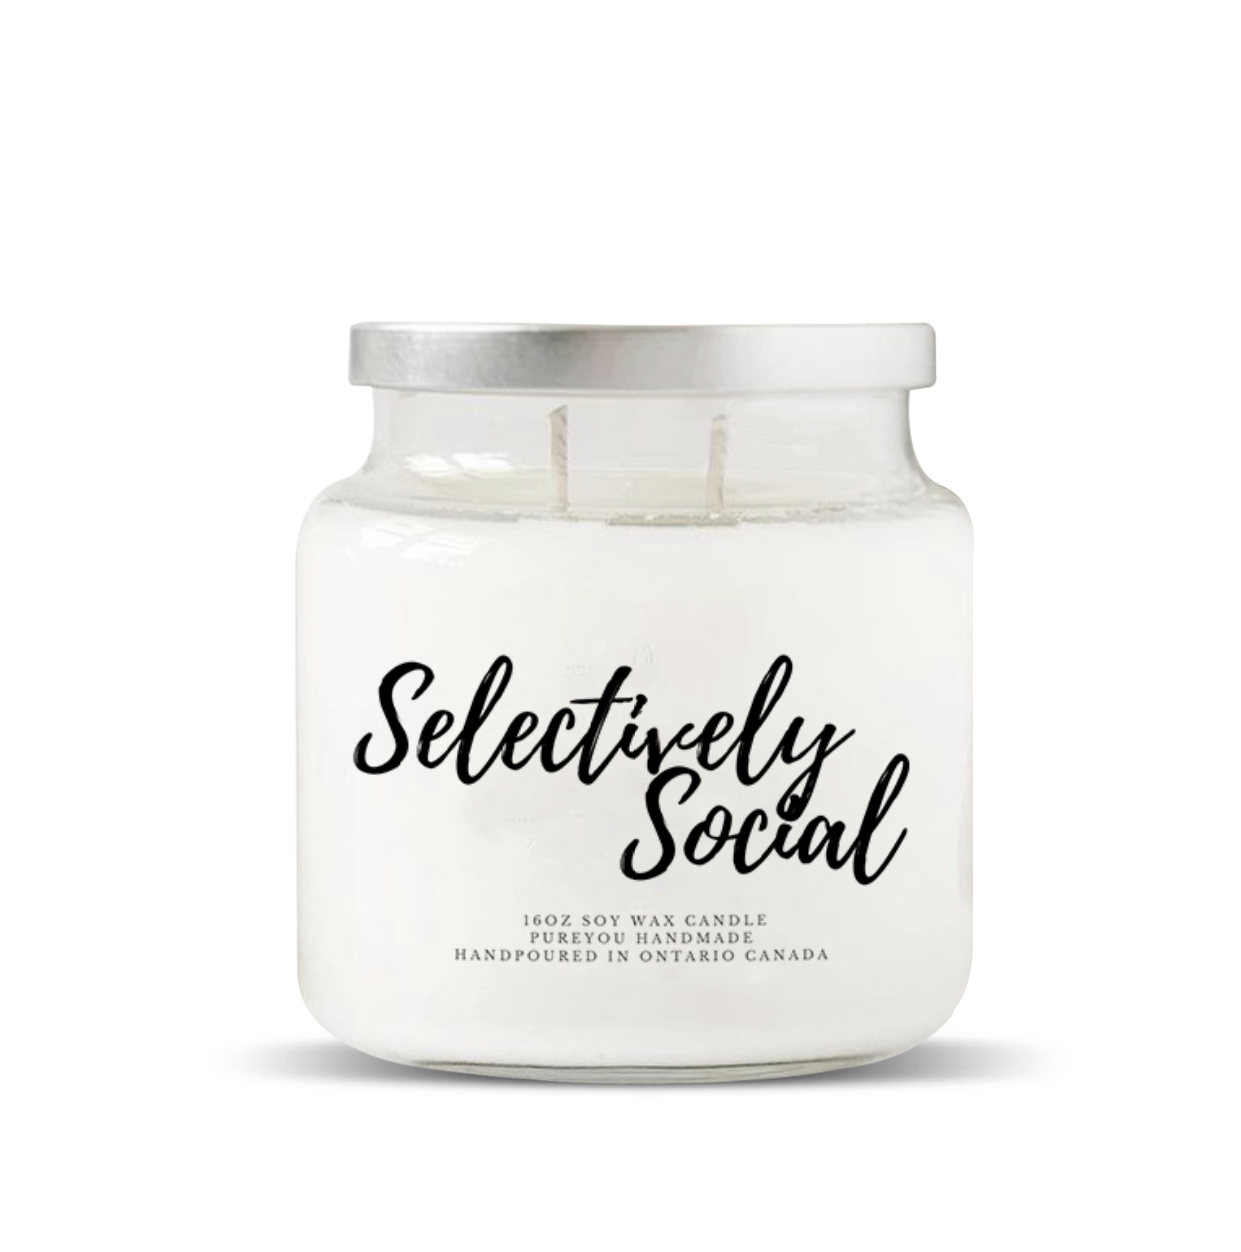 “Selectively Social” Soy Wax Candle